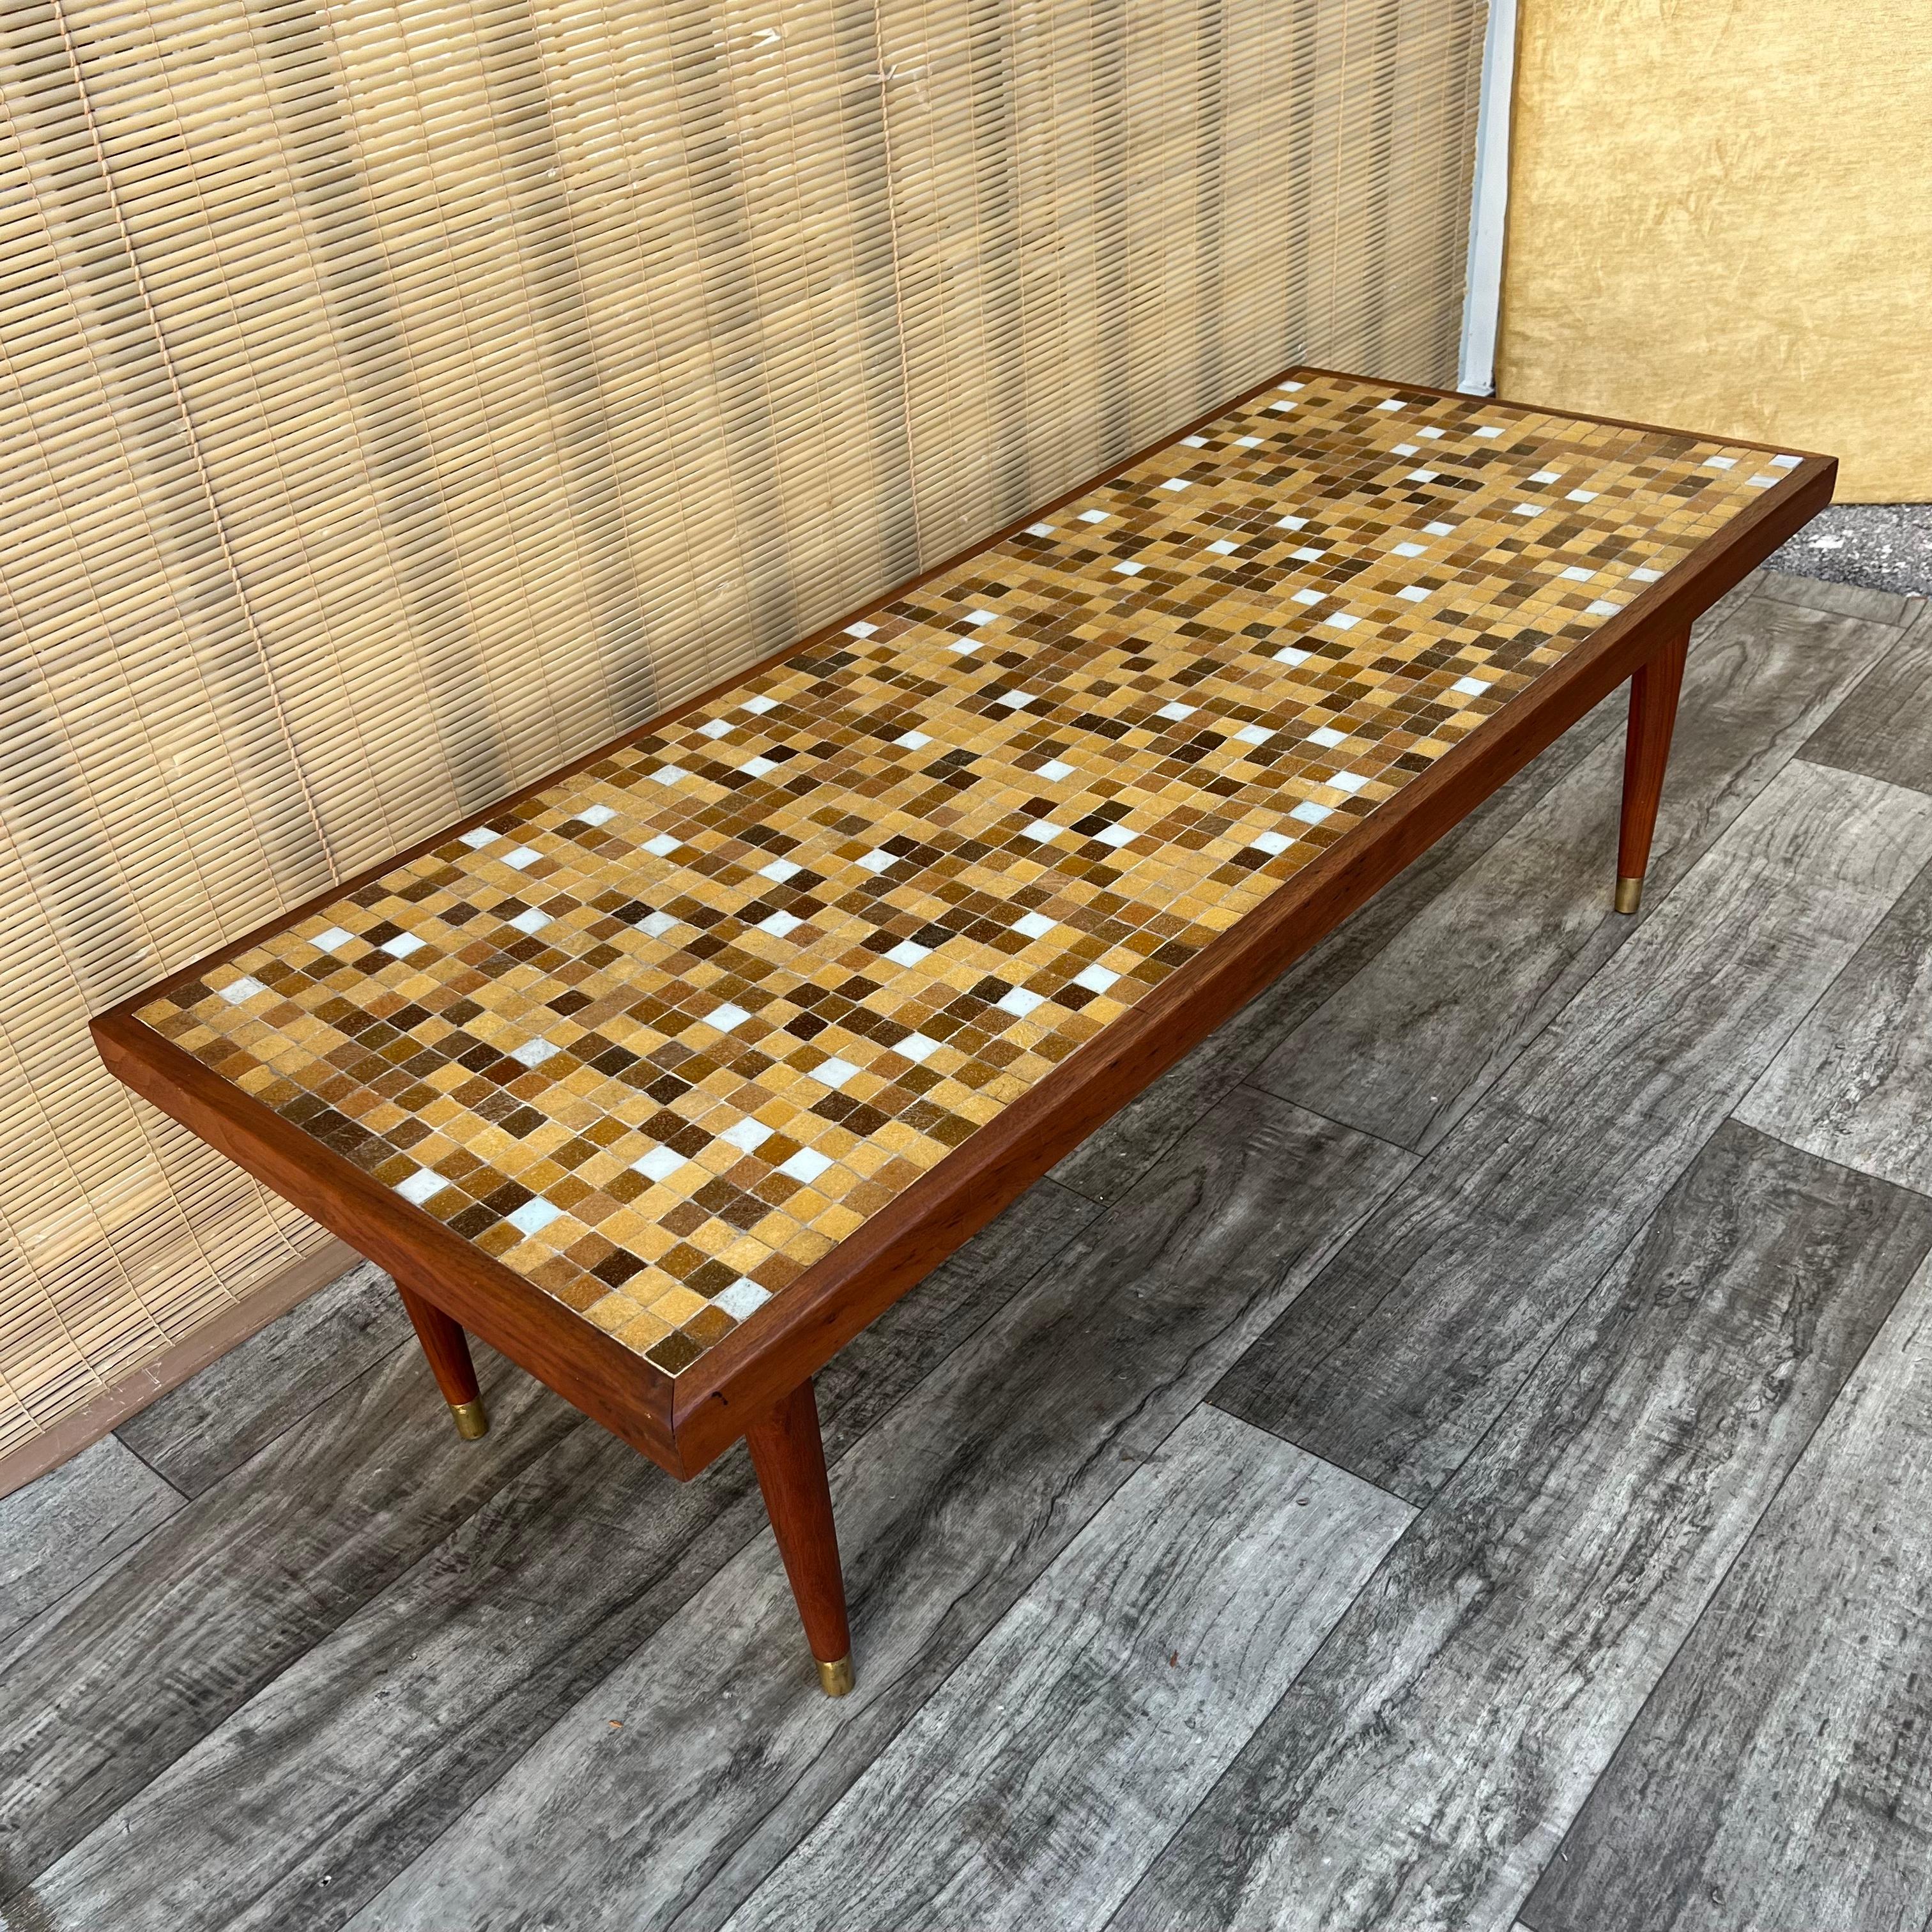 Vintage Mid Century Modern Mosaic Top Coffee Table in the Jane and Gordon Martz Style. Circa 1960s
Features a solid wood frame with an earth tones mosaic top, and removable tapered legs. 
In good original condition with minor signs of wear and age.